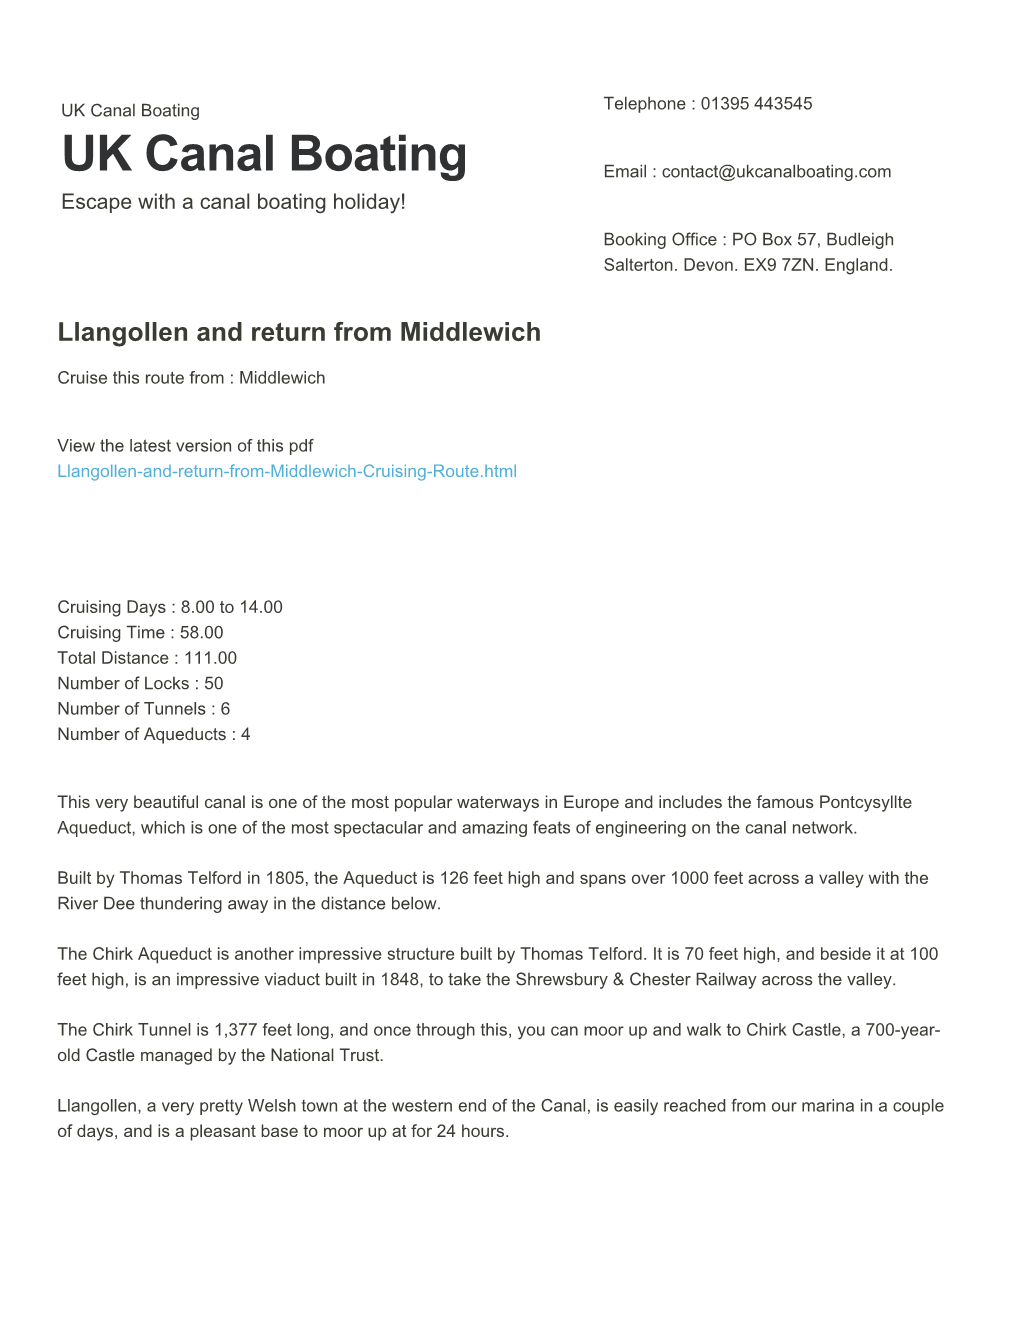 Llangollen and Return from Middlewich | UK Canal Boating